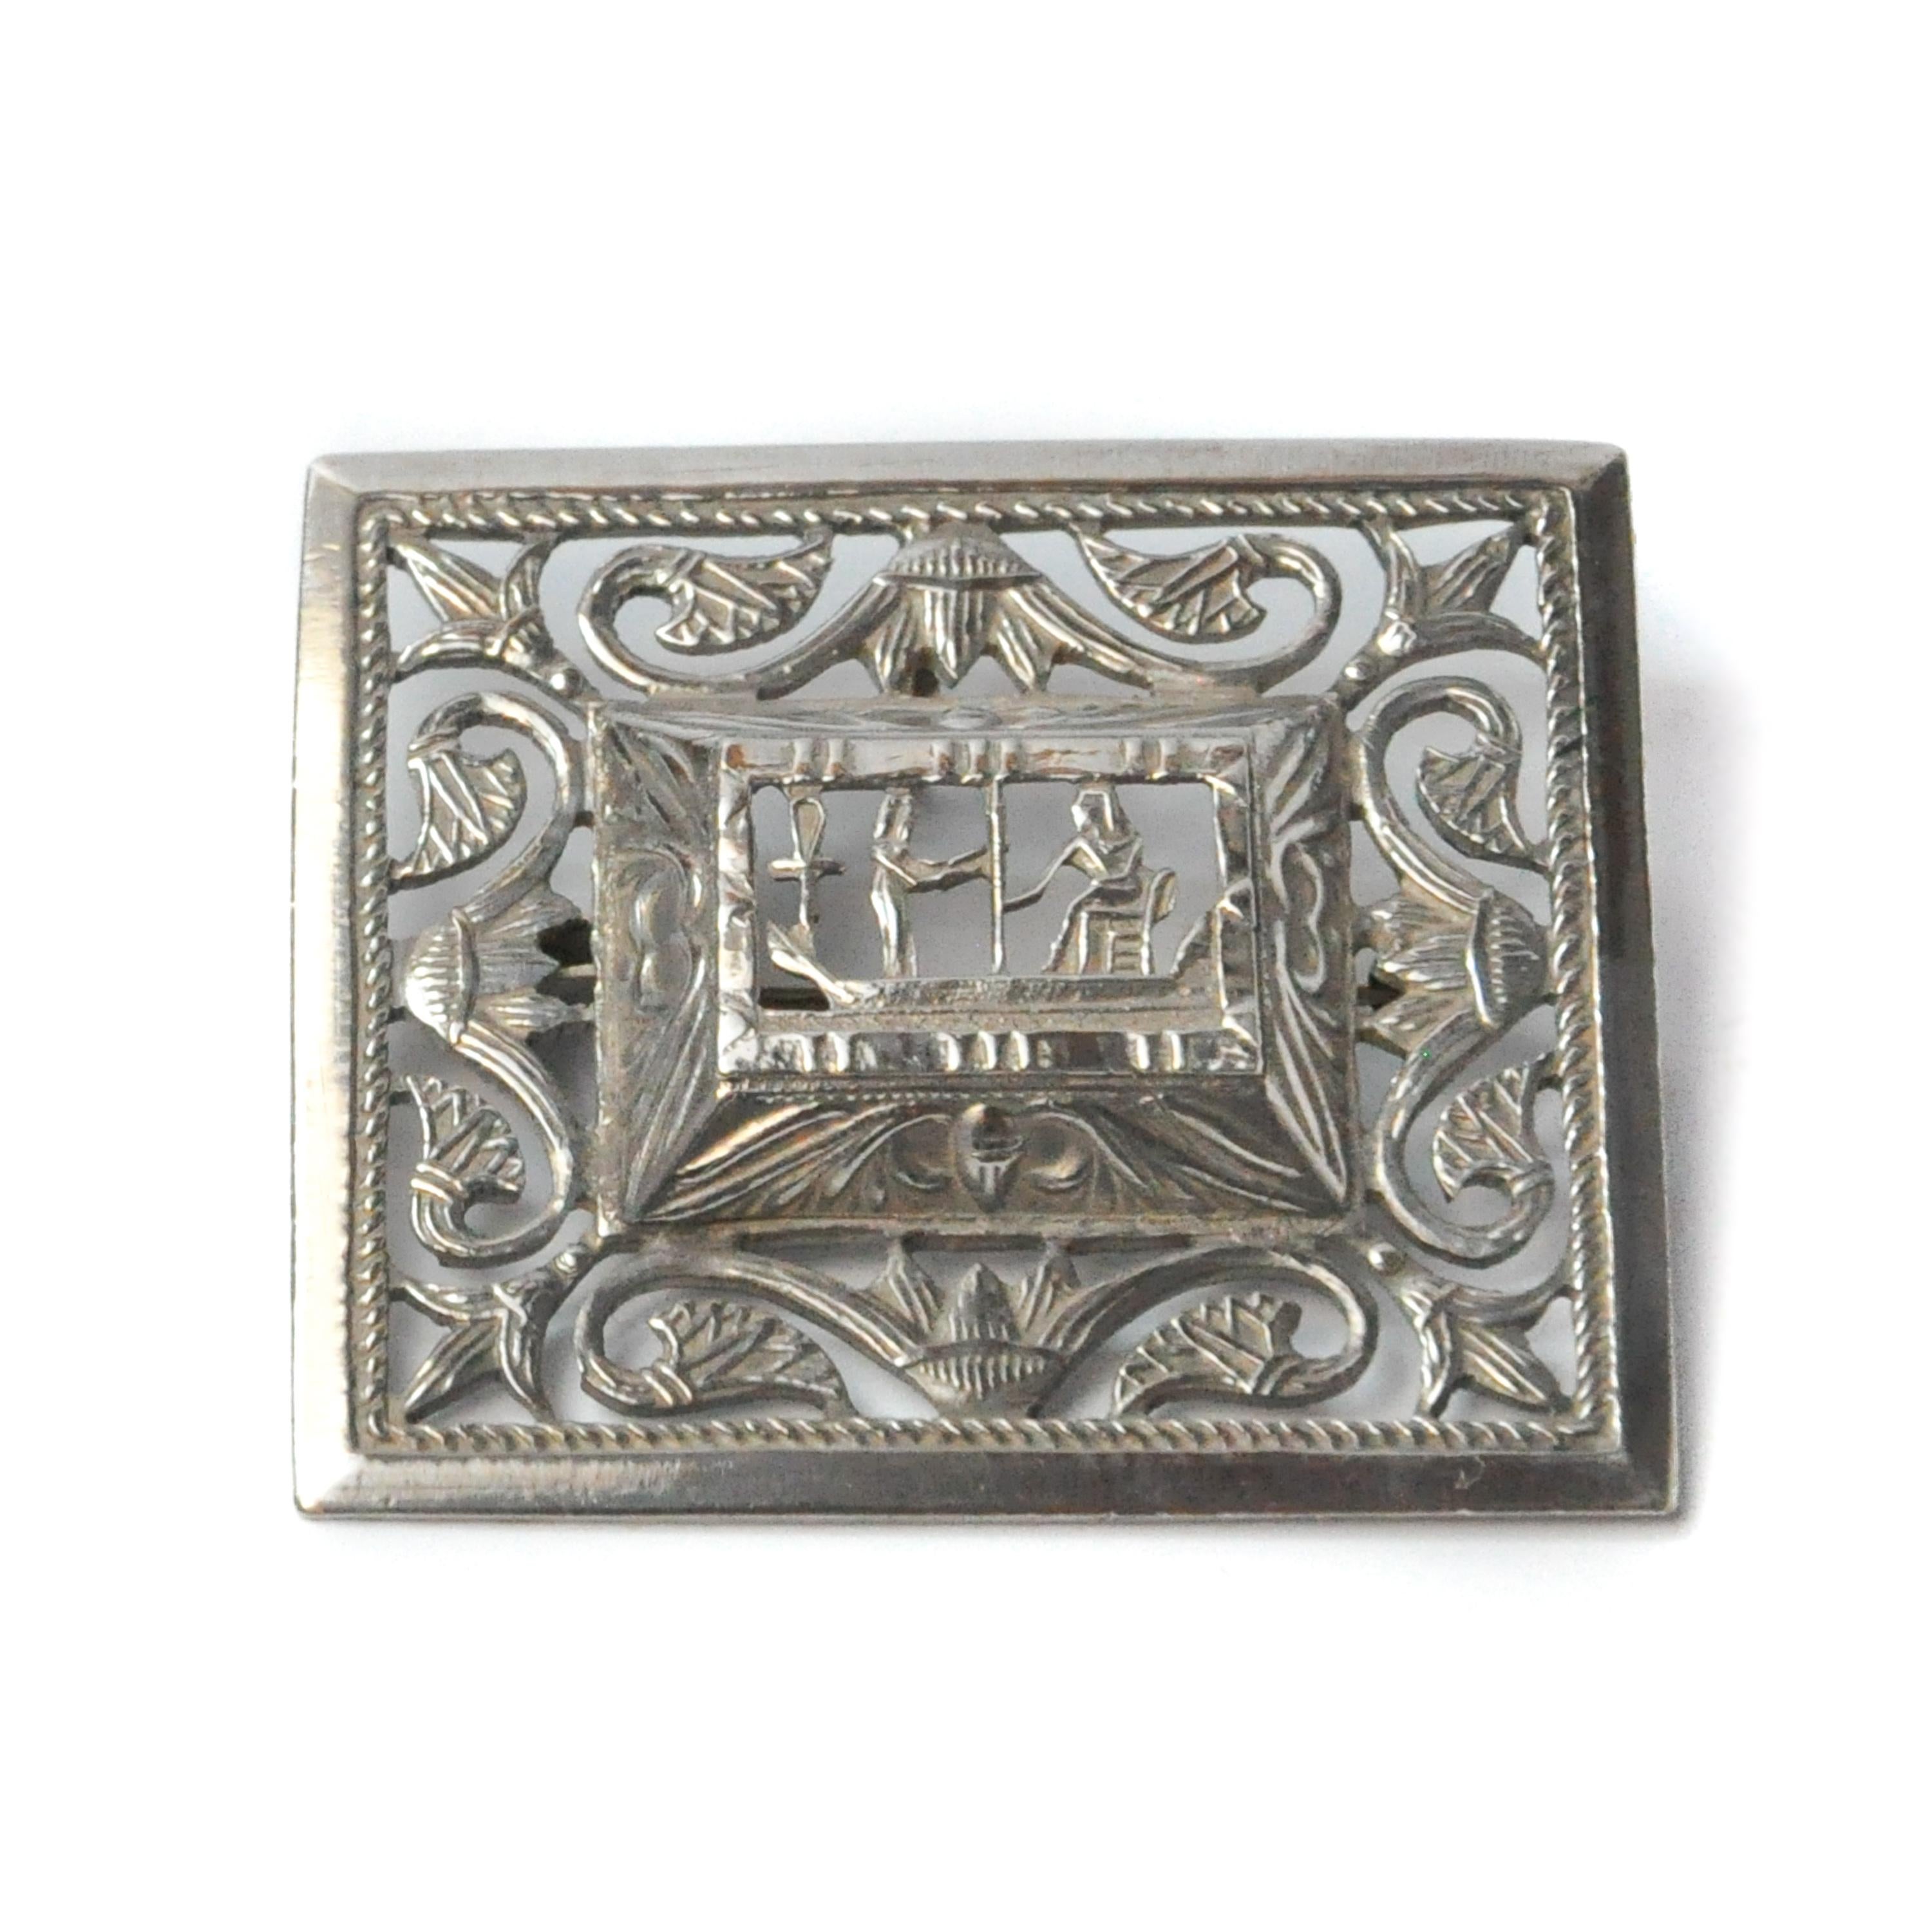 A vintage silver rectangular brooch with a cut out of an Egyptian hieroglyphic mythology scene. The scene depicted here is the worship of Osiris, as supreme deity of the dead, Osiris was the representative of the world order in the afterlife. Every